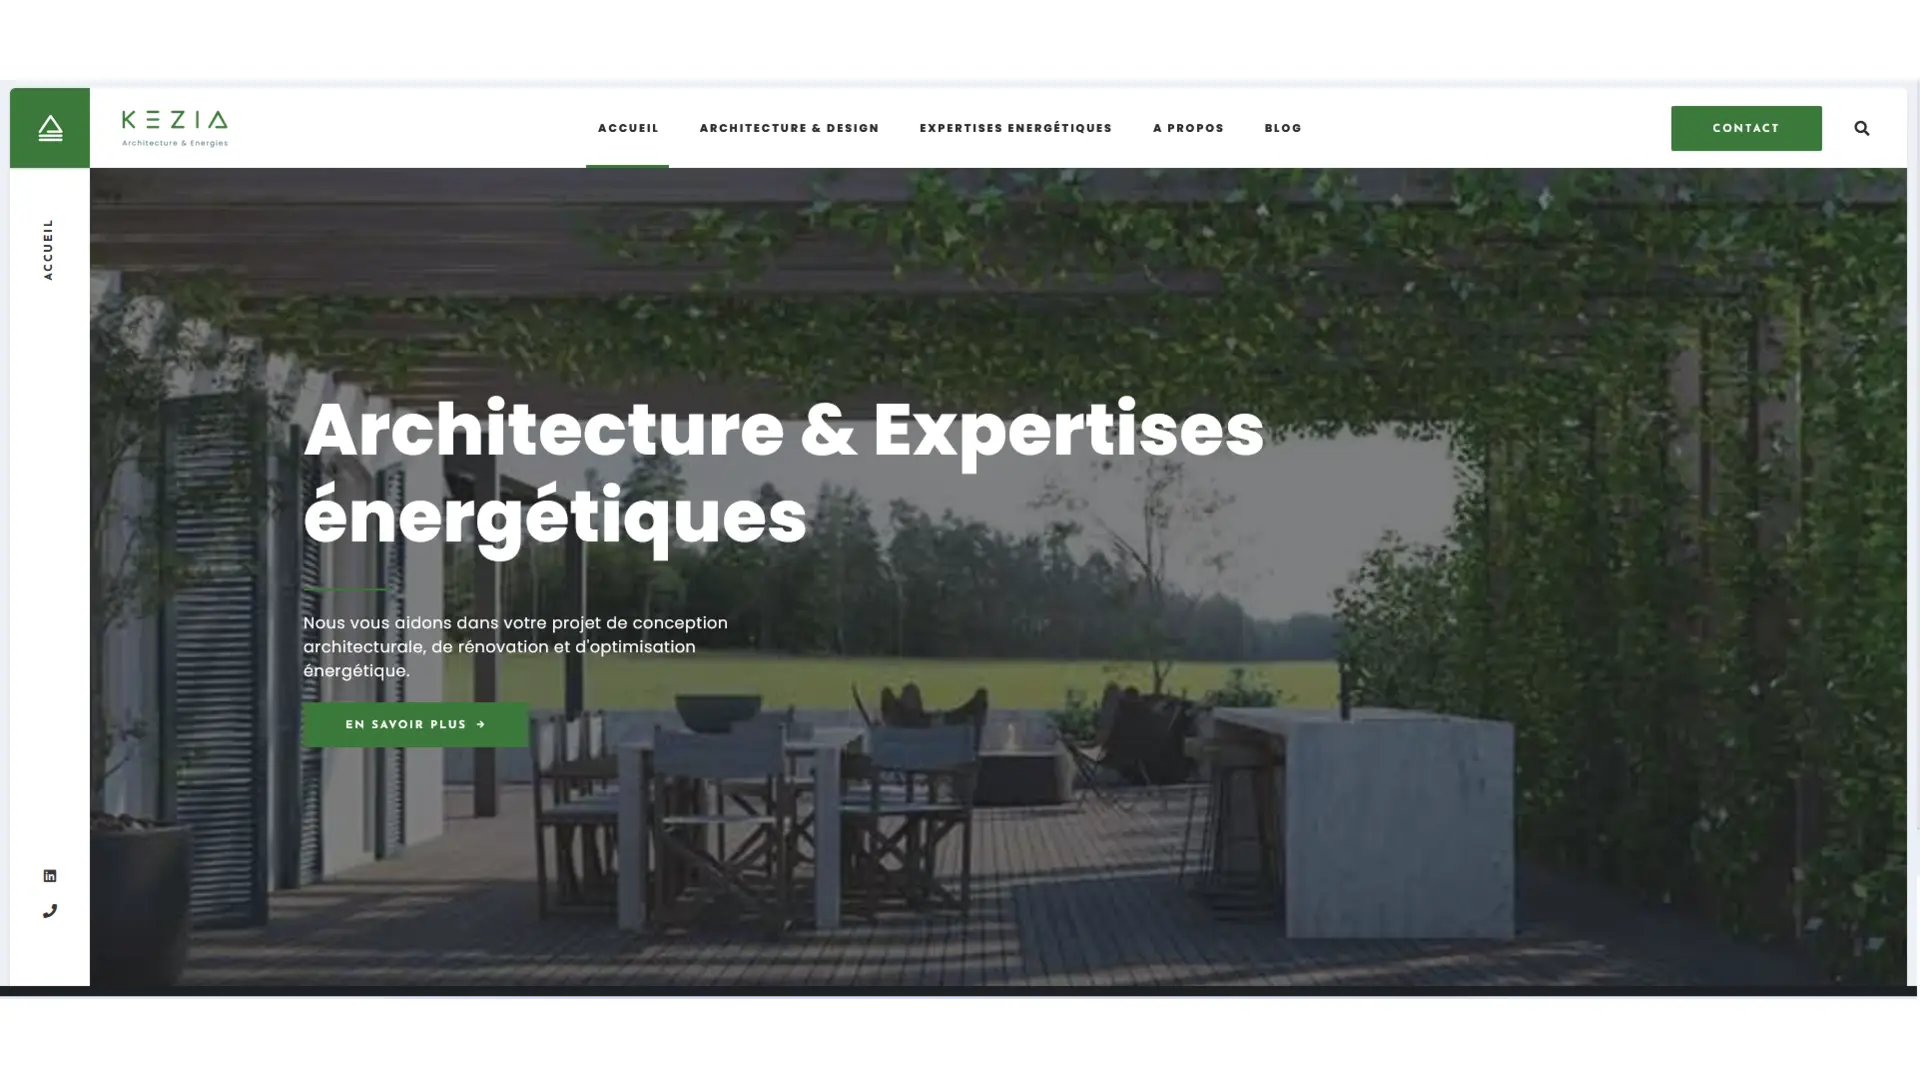 RadiantGloom - Website Creation for an Architectural Agency